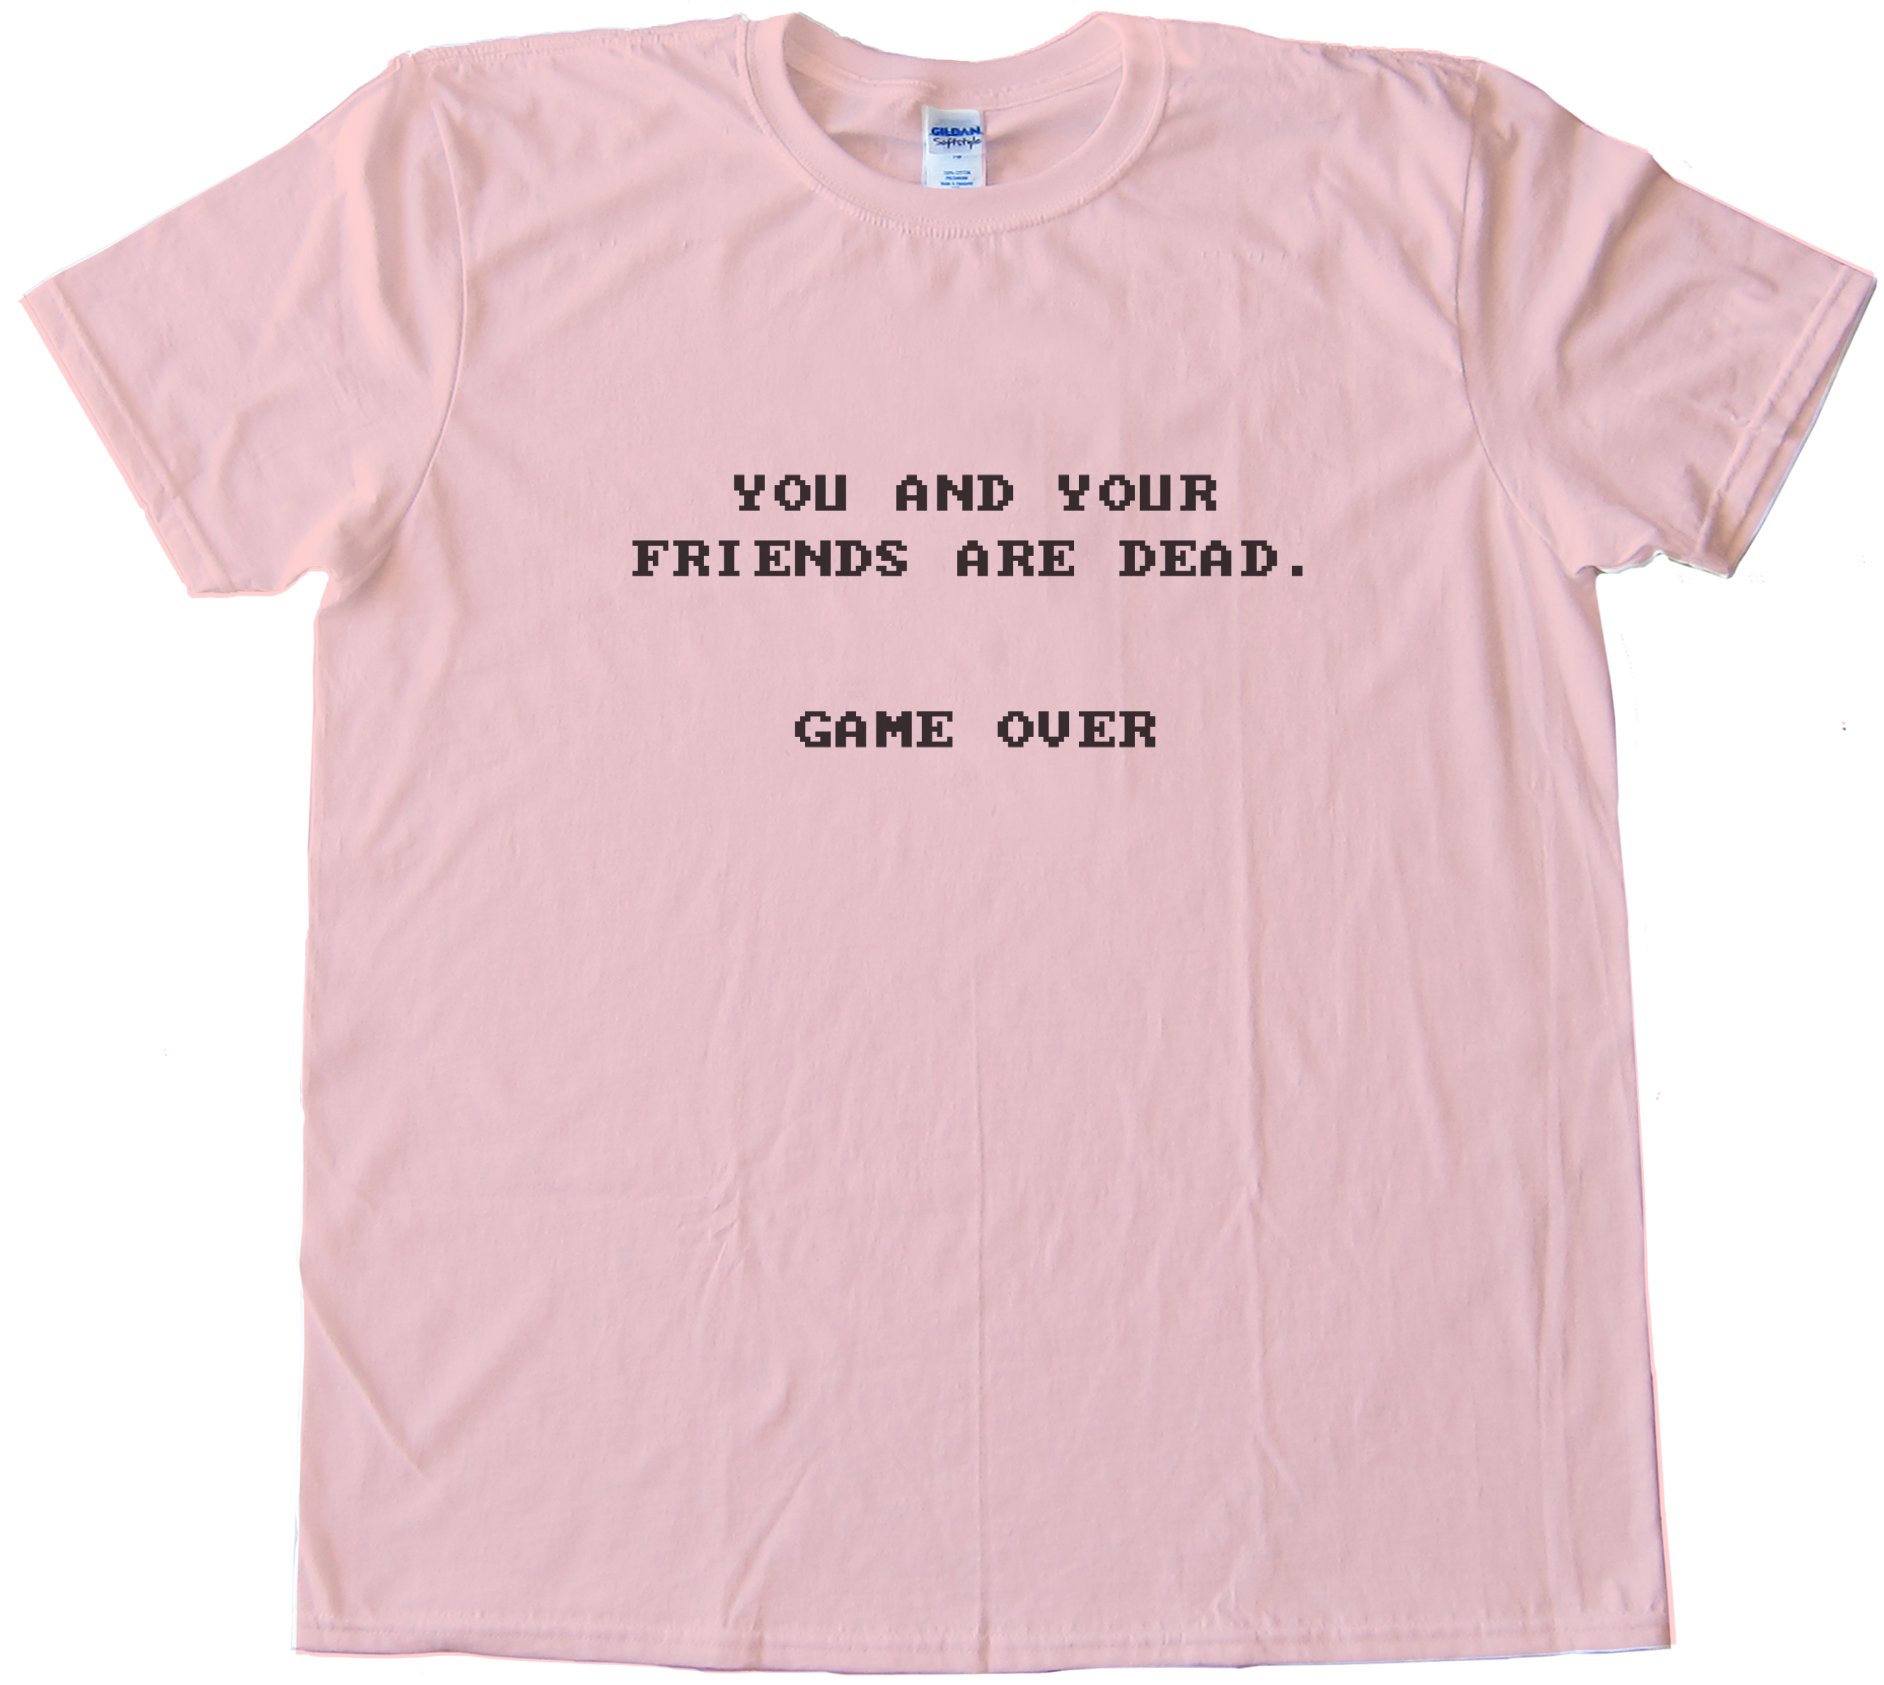 You And Your Friends Are Dead. Game Over Tee Shirt